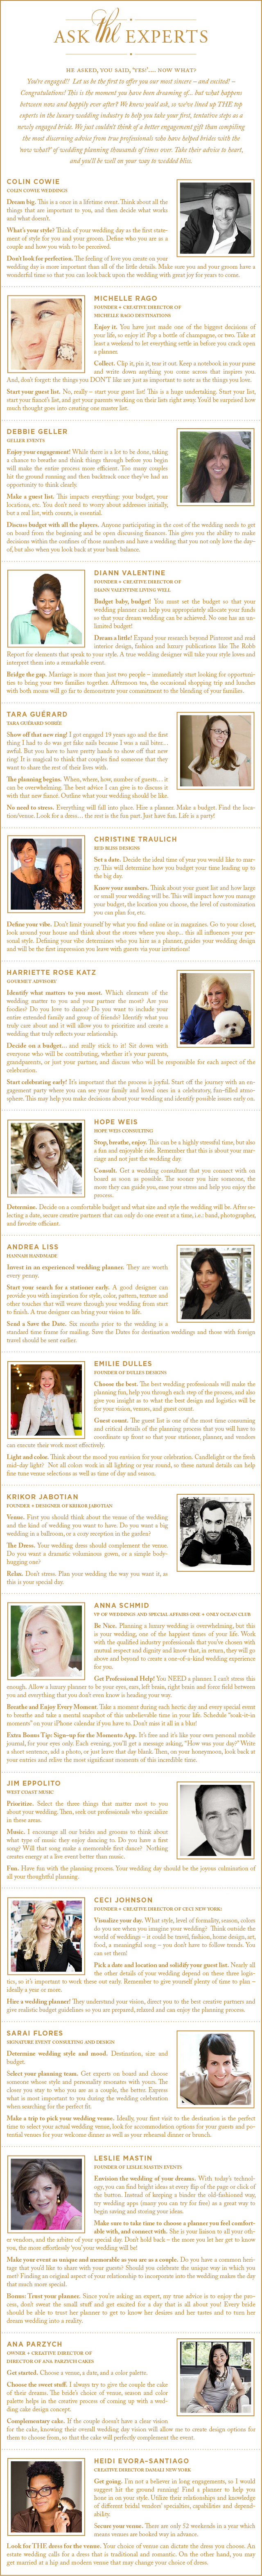 Ask The Experts The Bridal Circle January